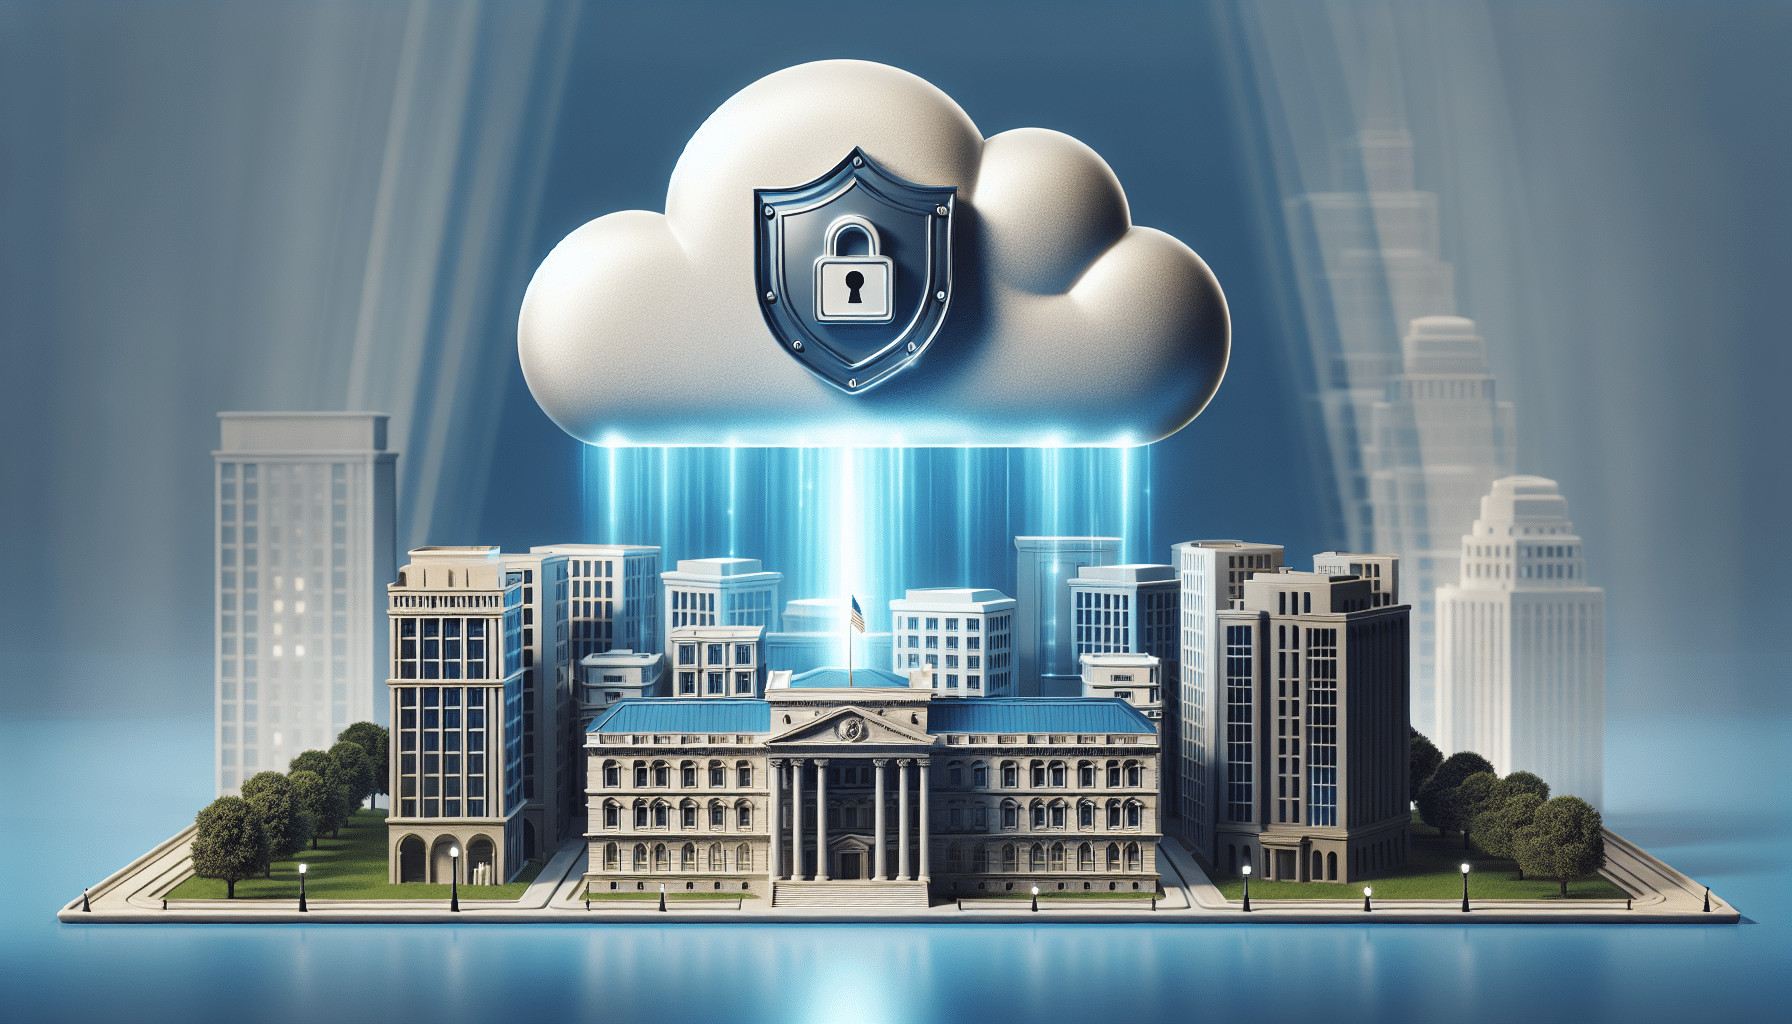 Illustration of a cloud service provider offering secure cloud services for federal agencies | fedramp | fedramp marketplace | fedramp compliance | fedramp compliant | fedramp authorization | fedramp certification | 38North Security